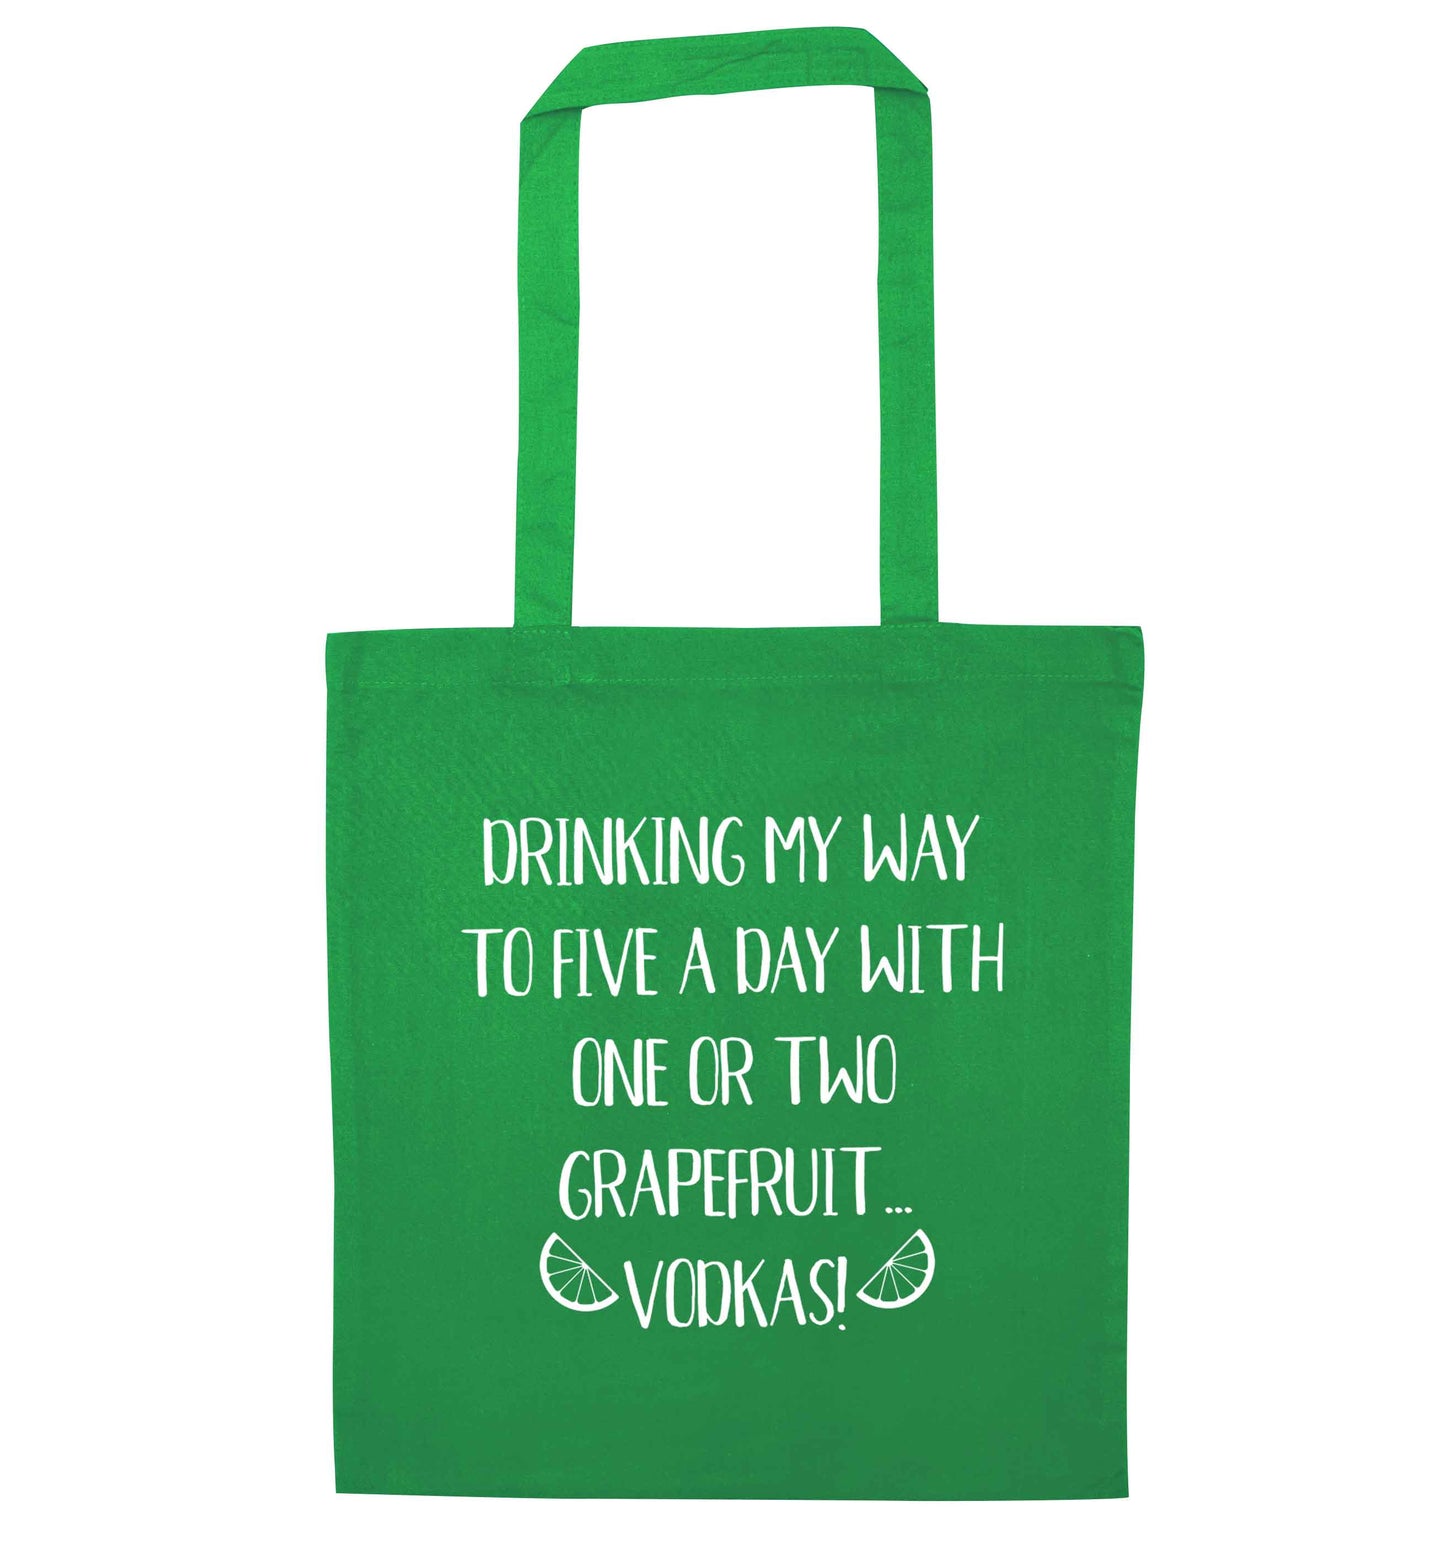 Drinking my way to five a day with one or two grapefruit vodkas green tote bag